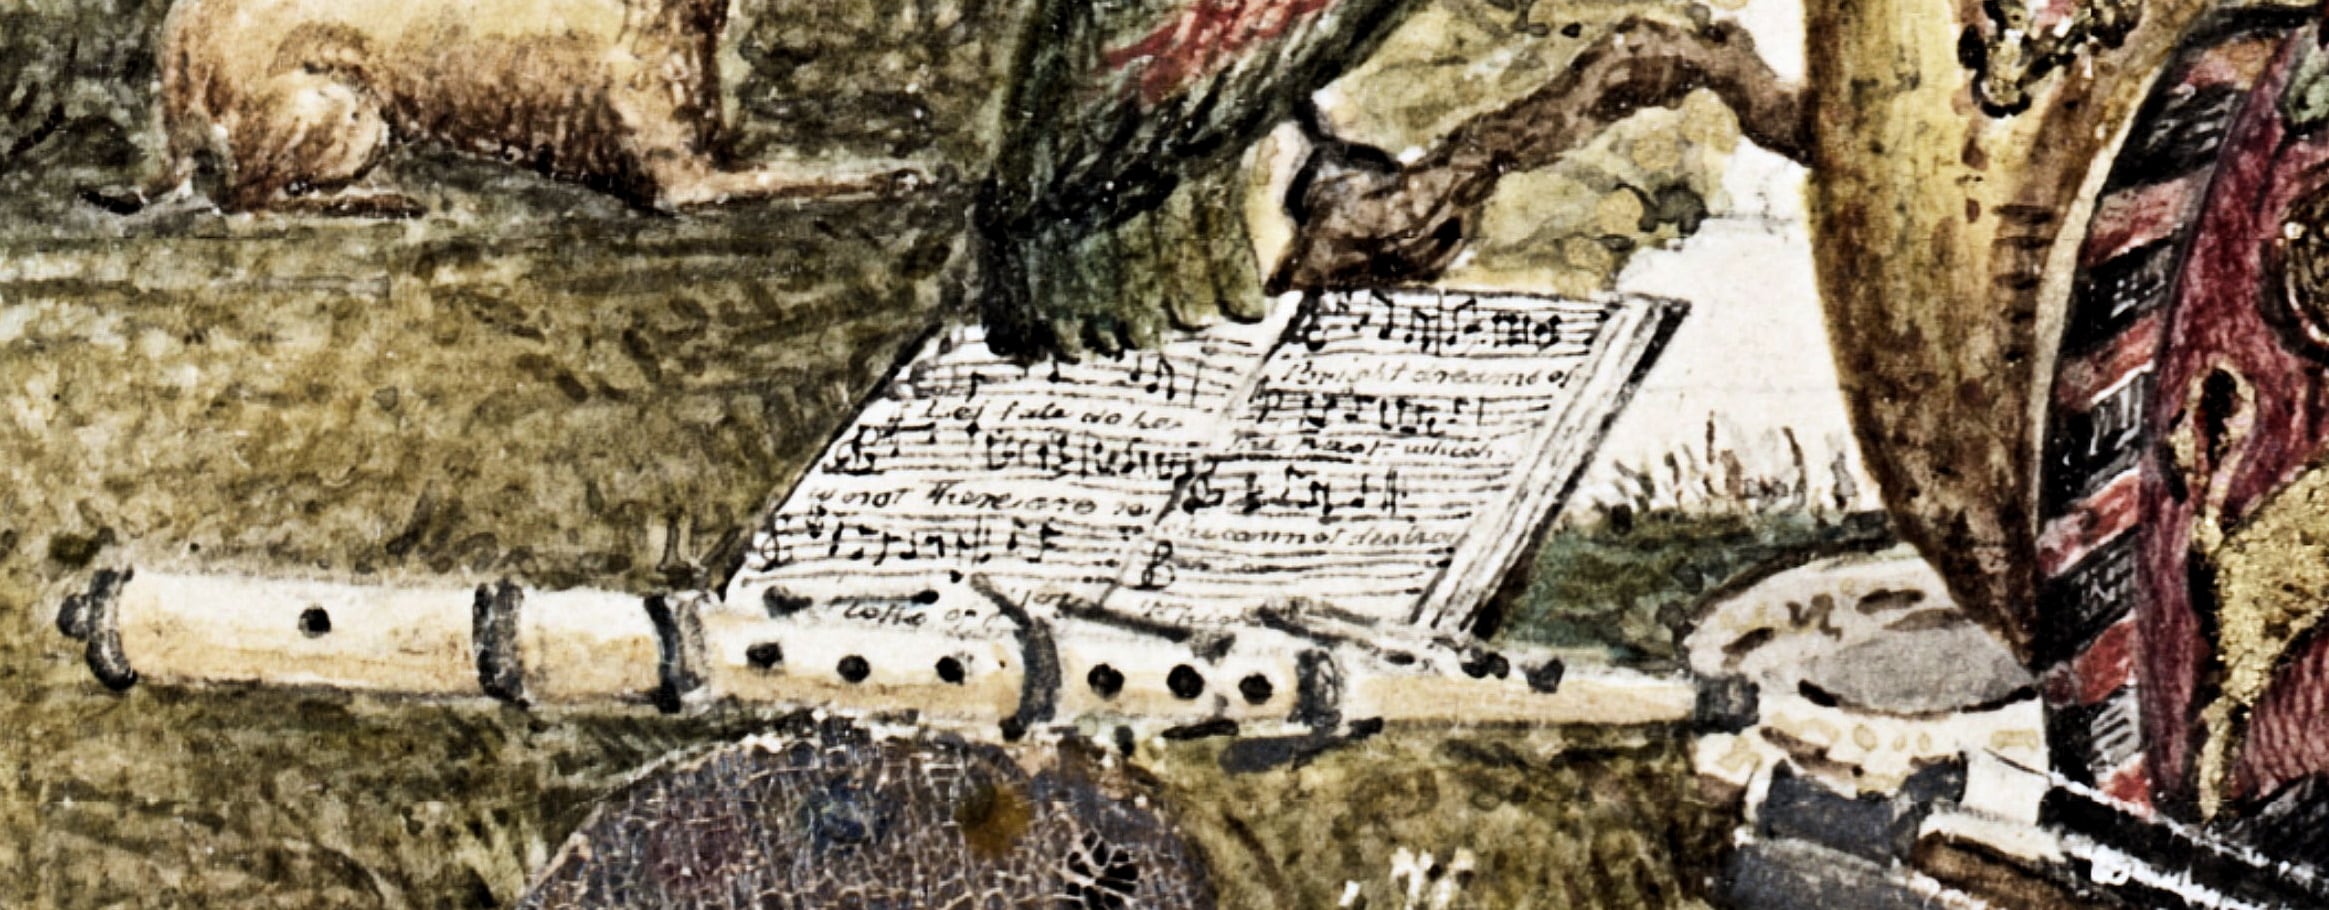 James Wallis, detail of colour sketch, with his flute and music; State Library of New South Wales